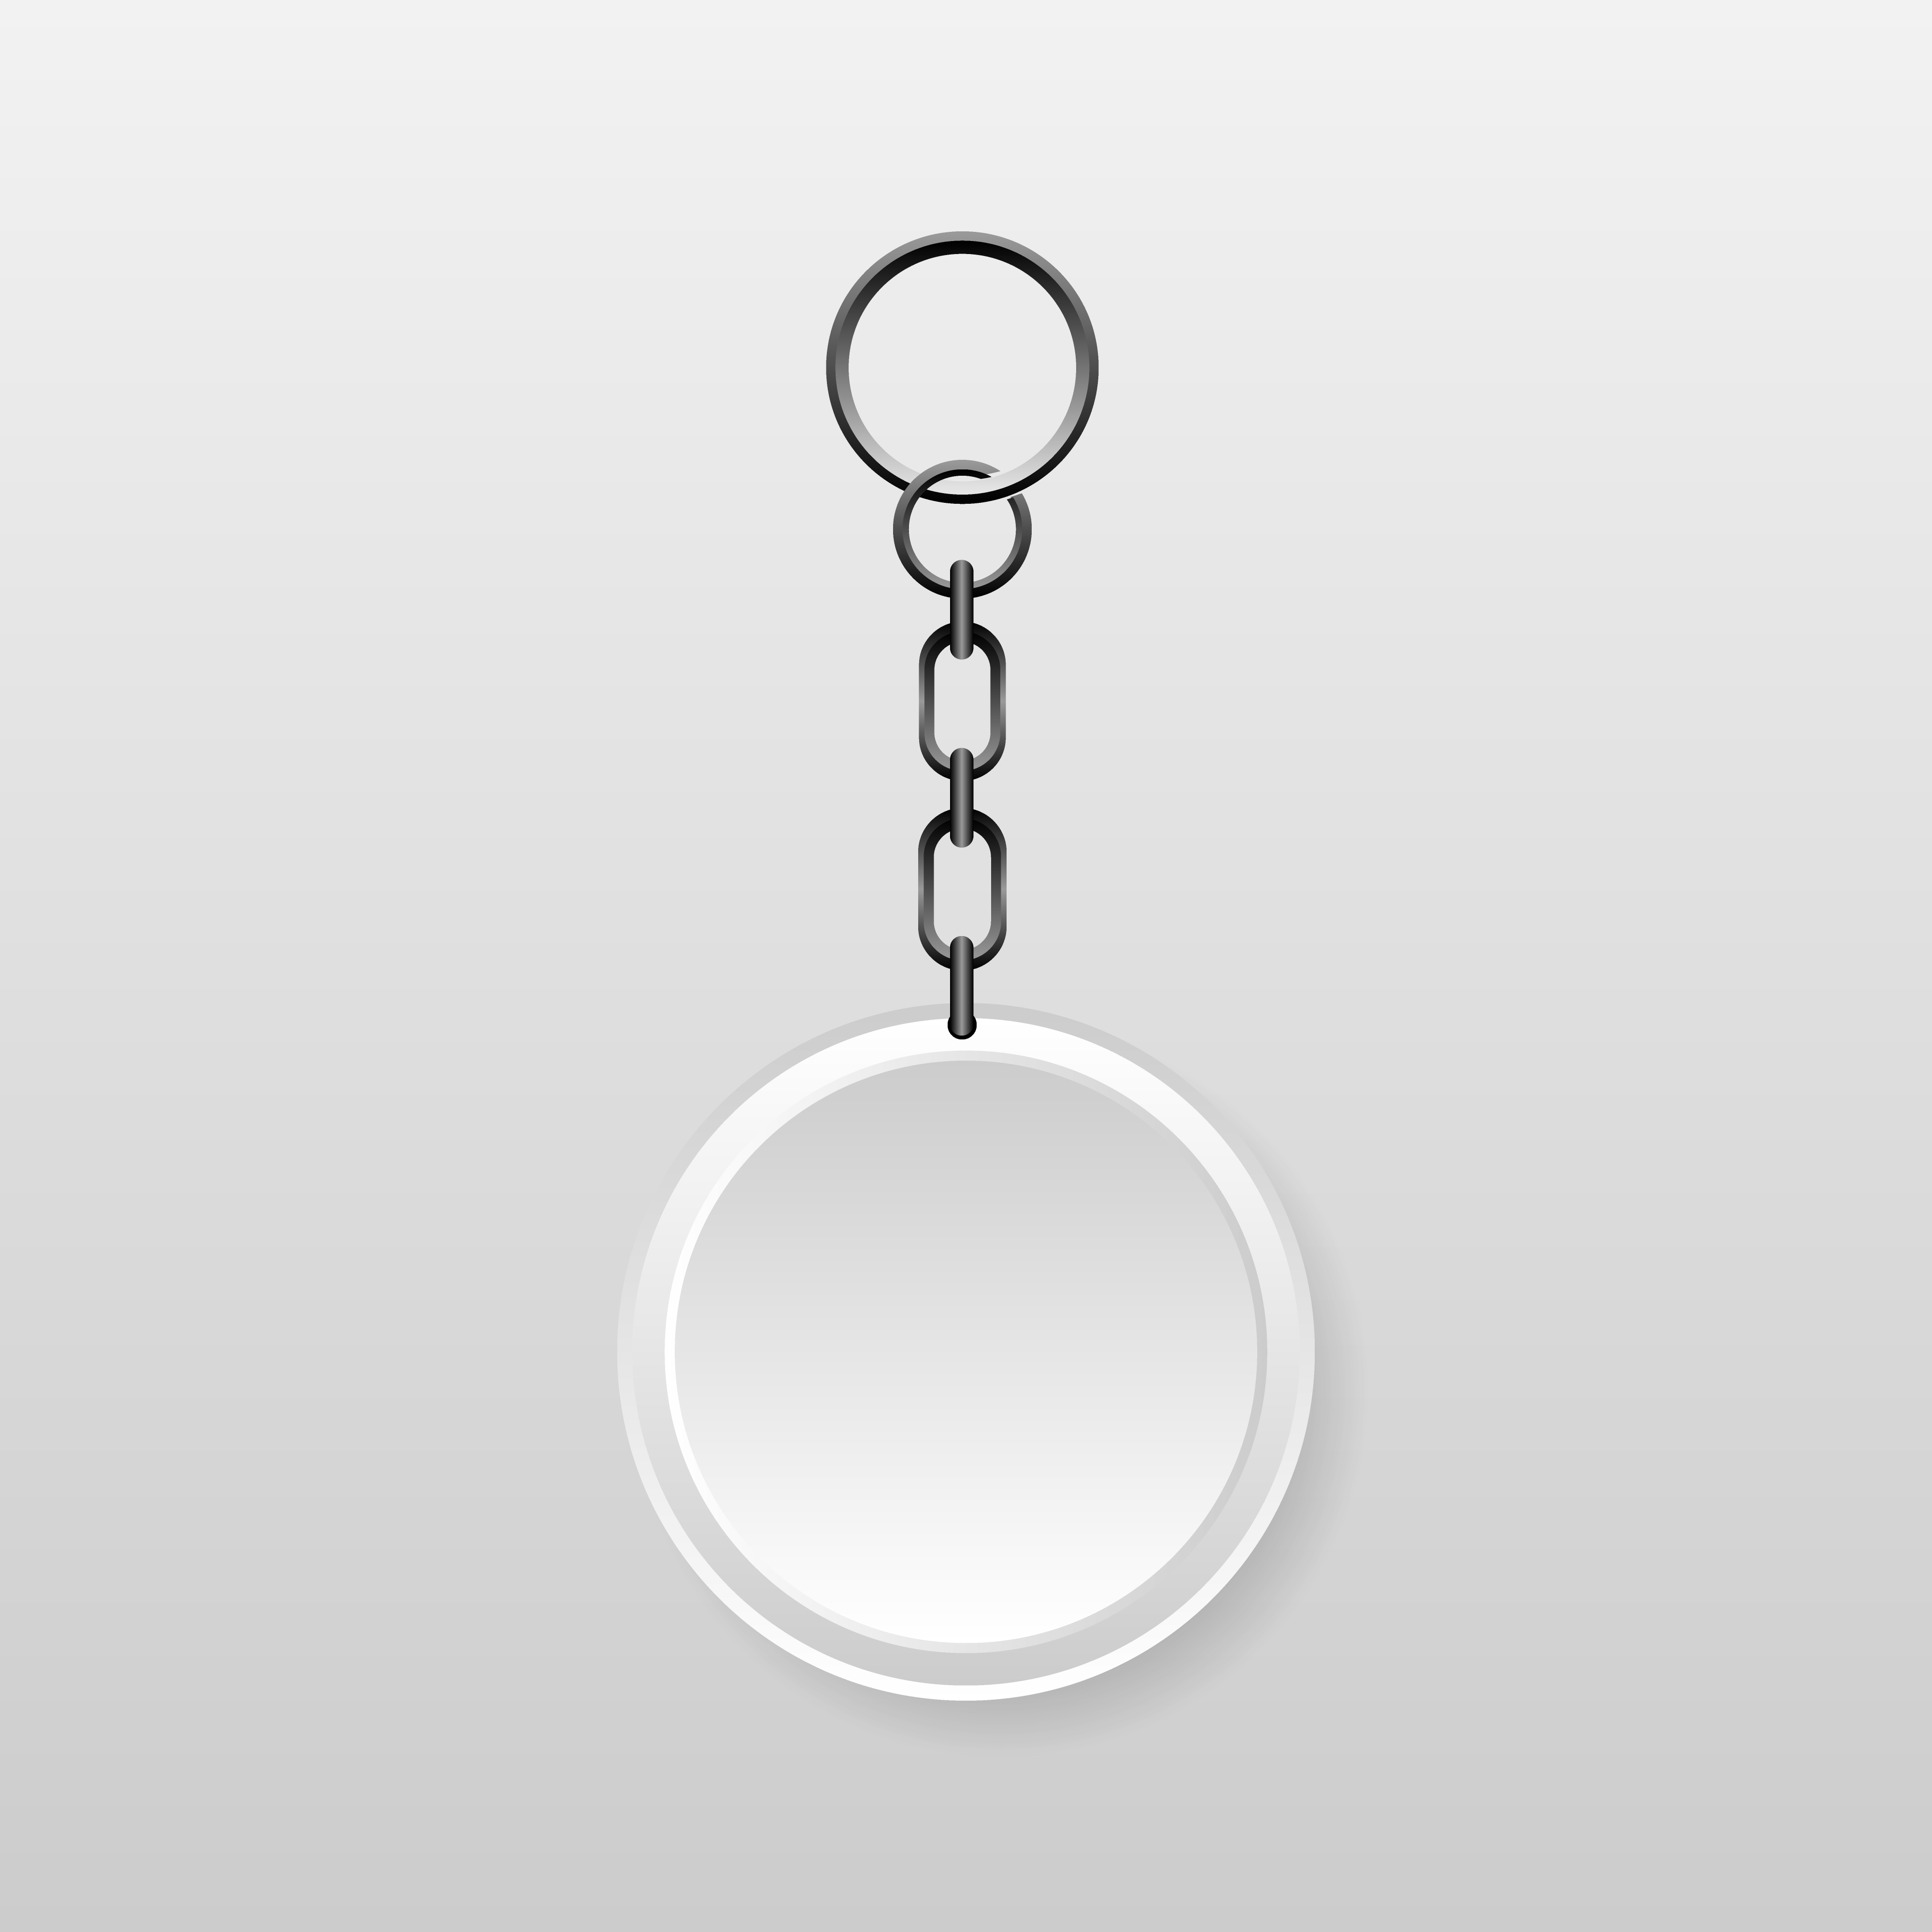 Download Keychain Mockup Vector Art, Icons, and Graphics for Free Download